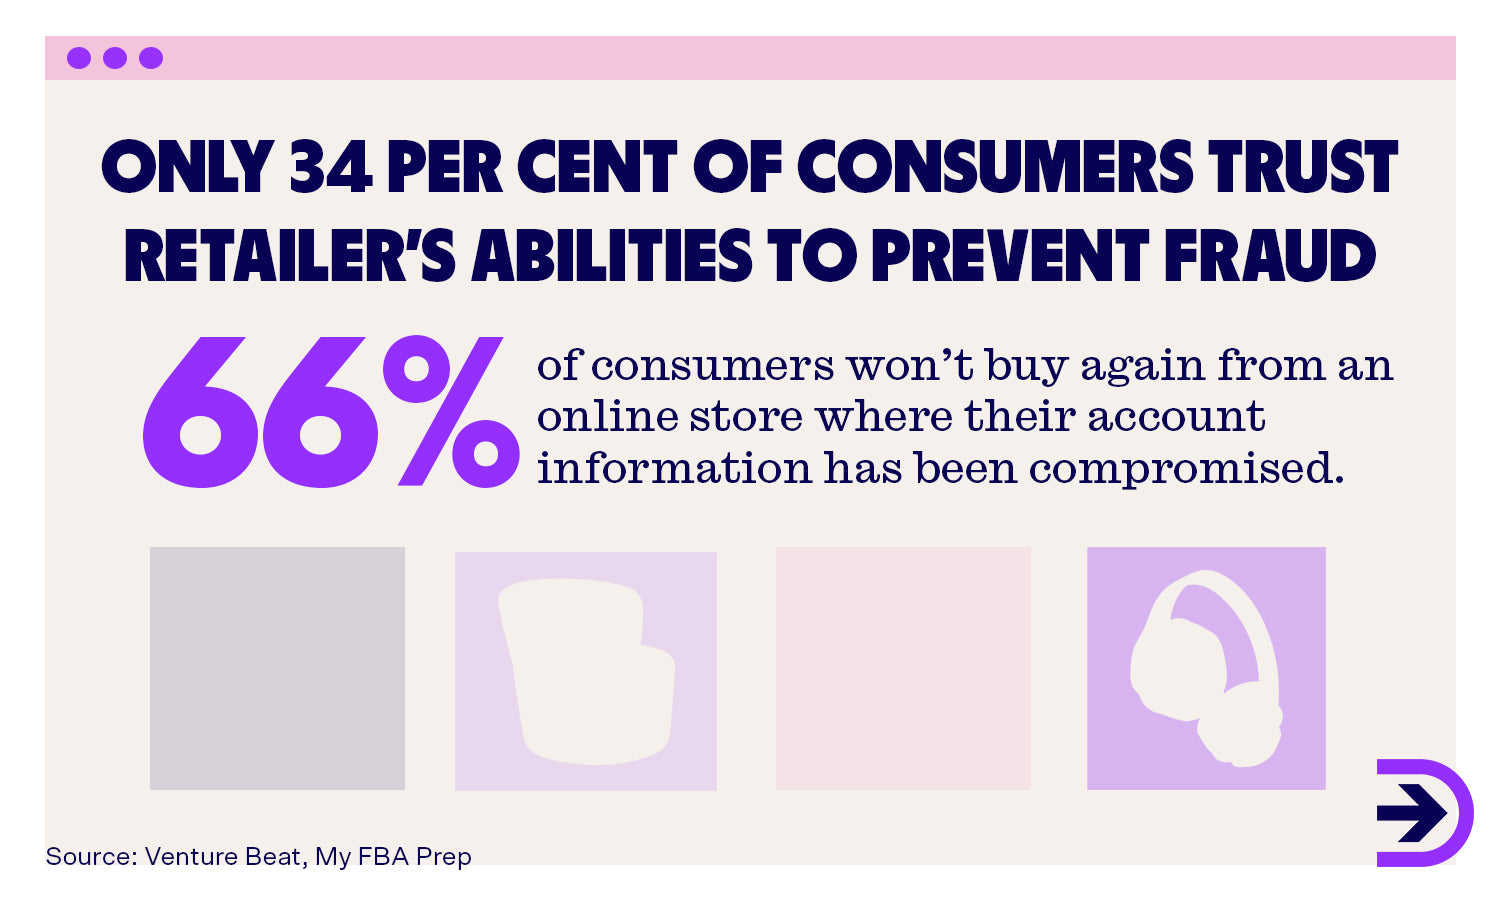 Ecommerce fraud can impact a brand's reputation with 66% of consumers not willing to return to an online store where account information has been compromised.